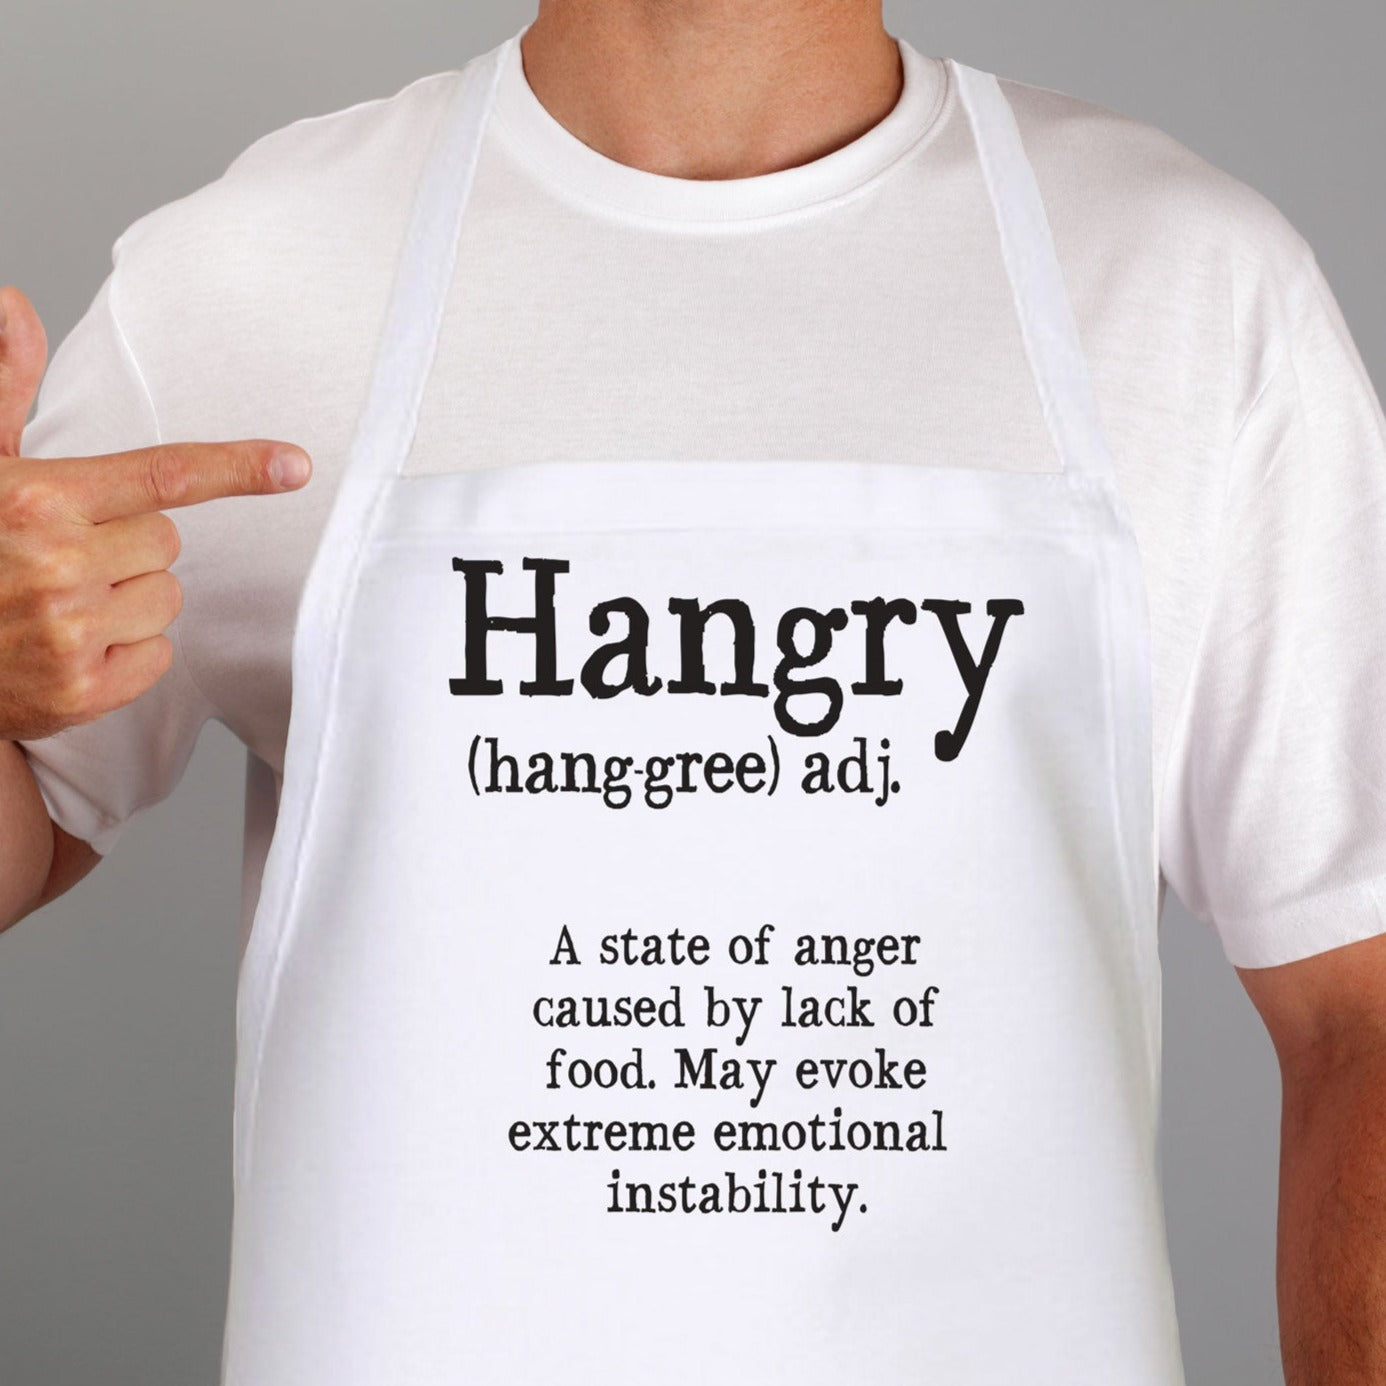 Aprons with Funny Sayings & Designs